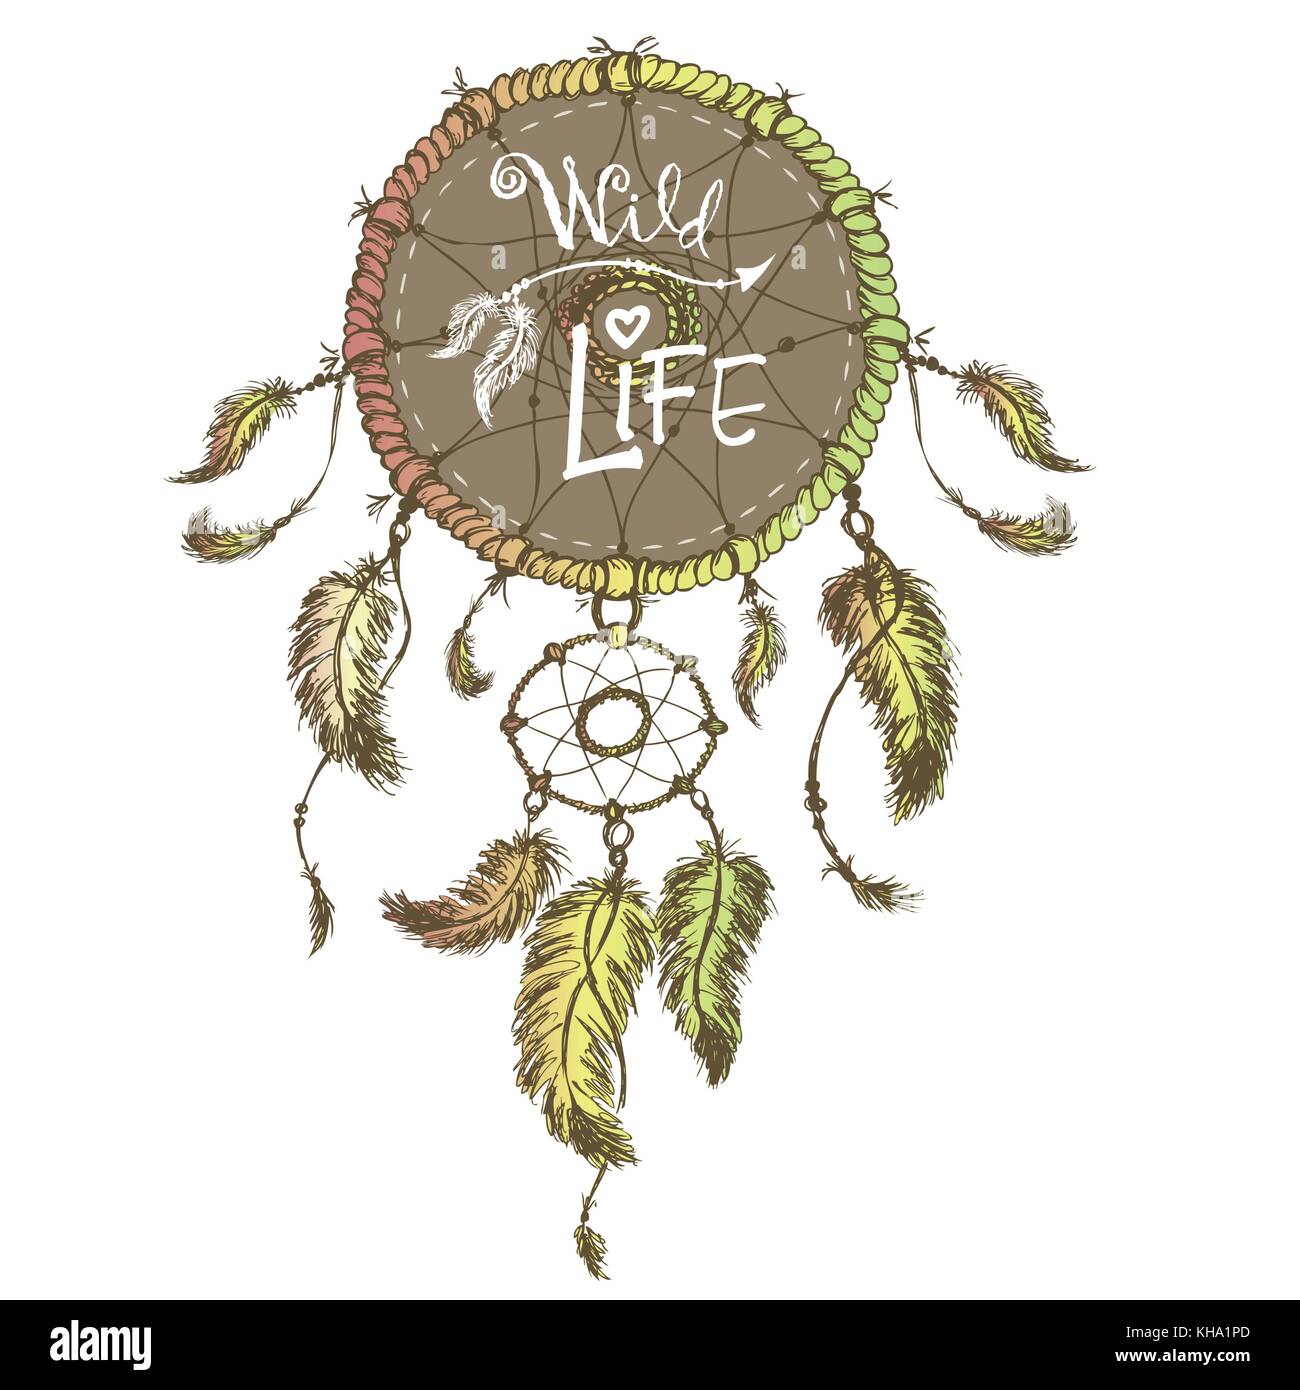 Dream catcher isolated on white background.Wild life. hand drawn vector illustration Stock Vector